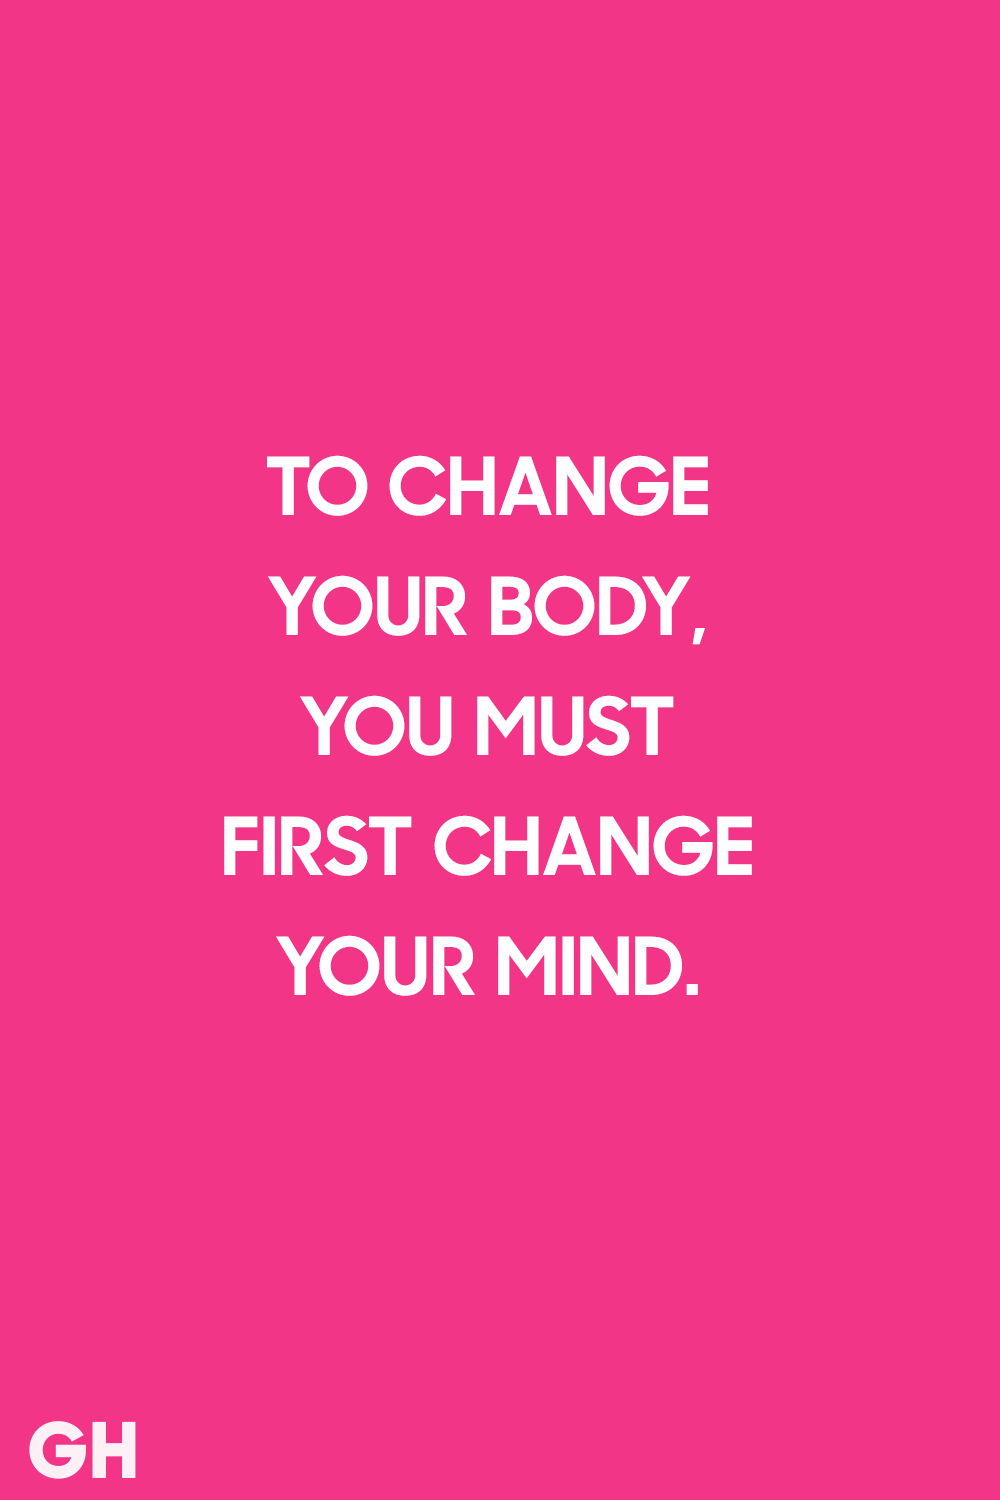 to change your body, you must first change your mind